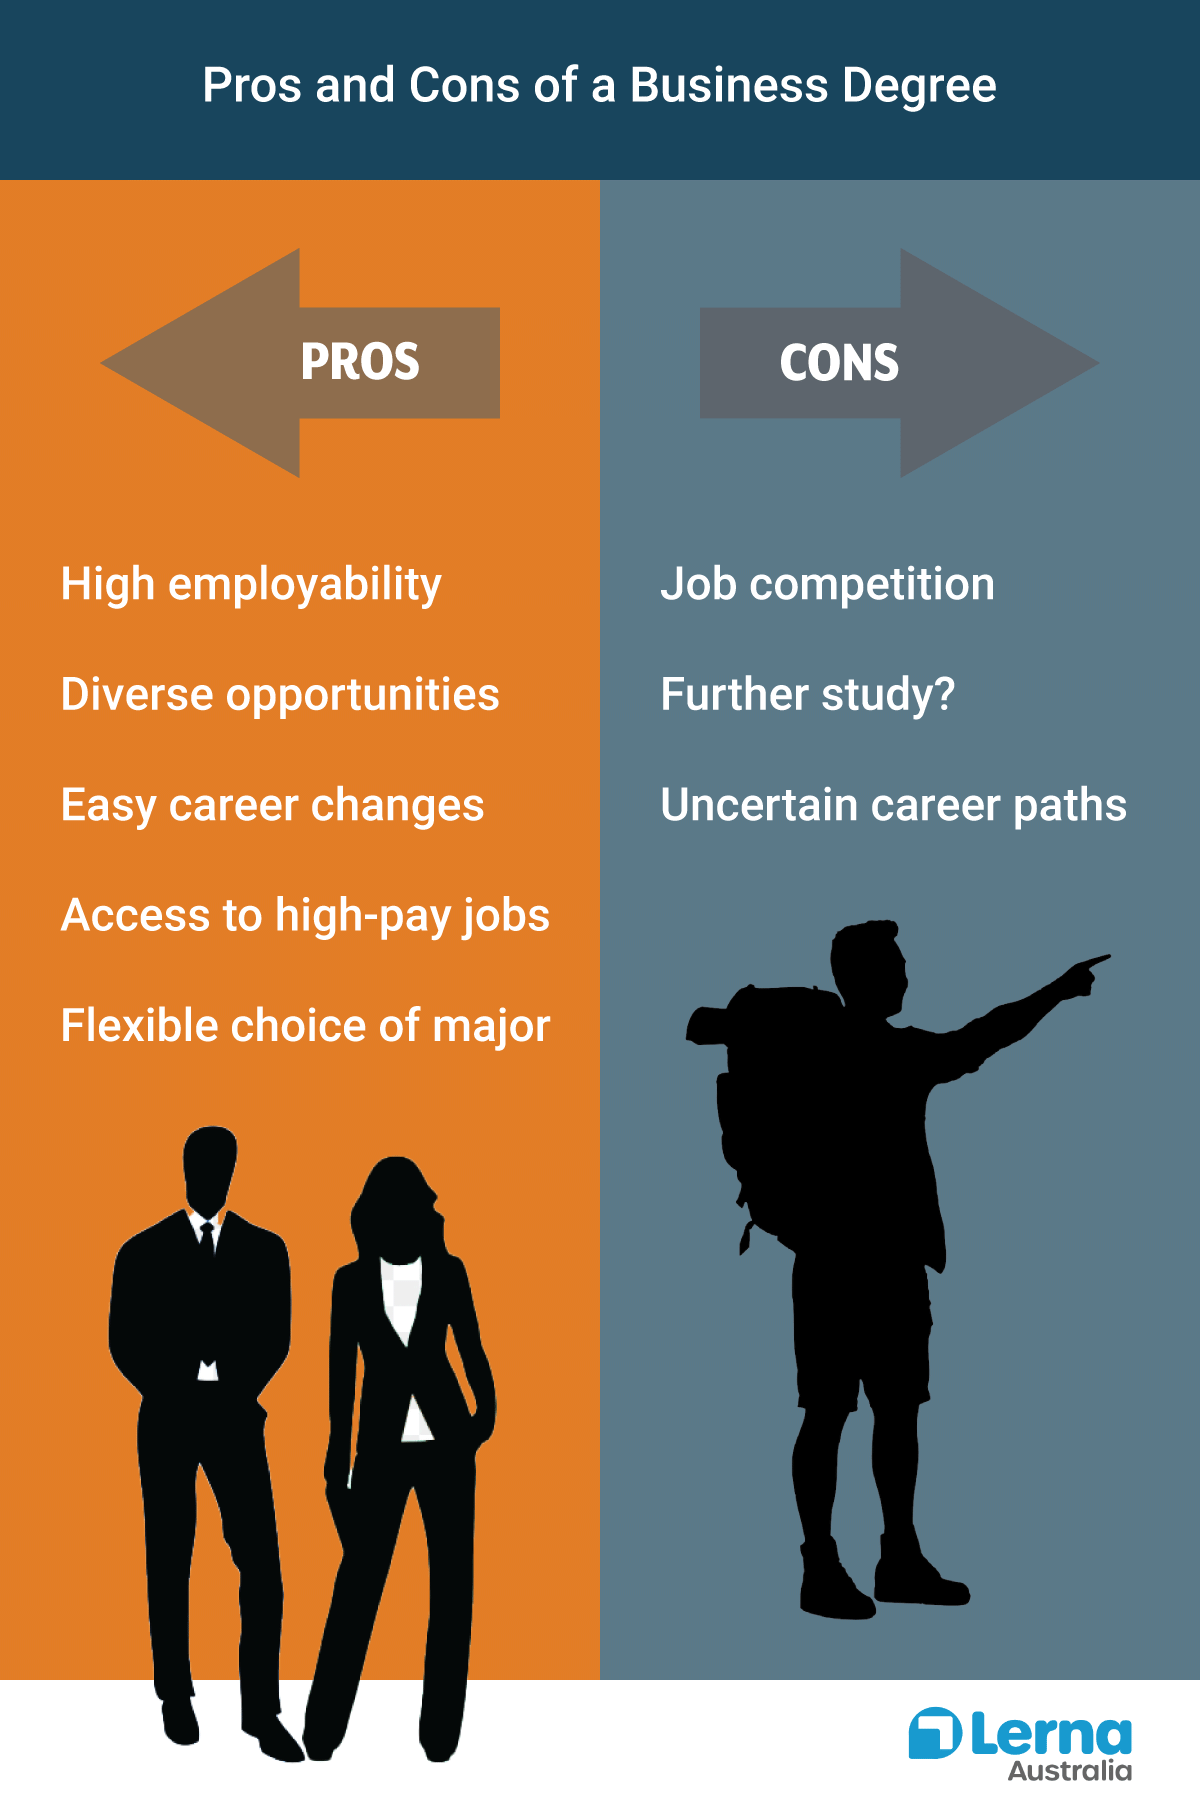 Business degree pros and cons